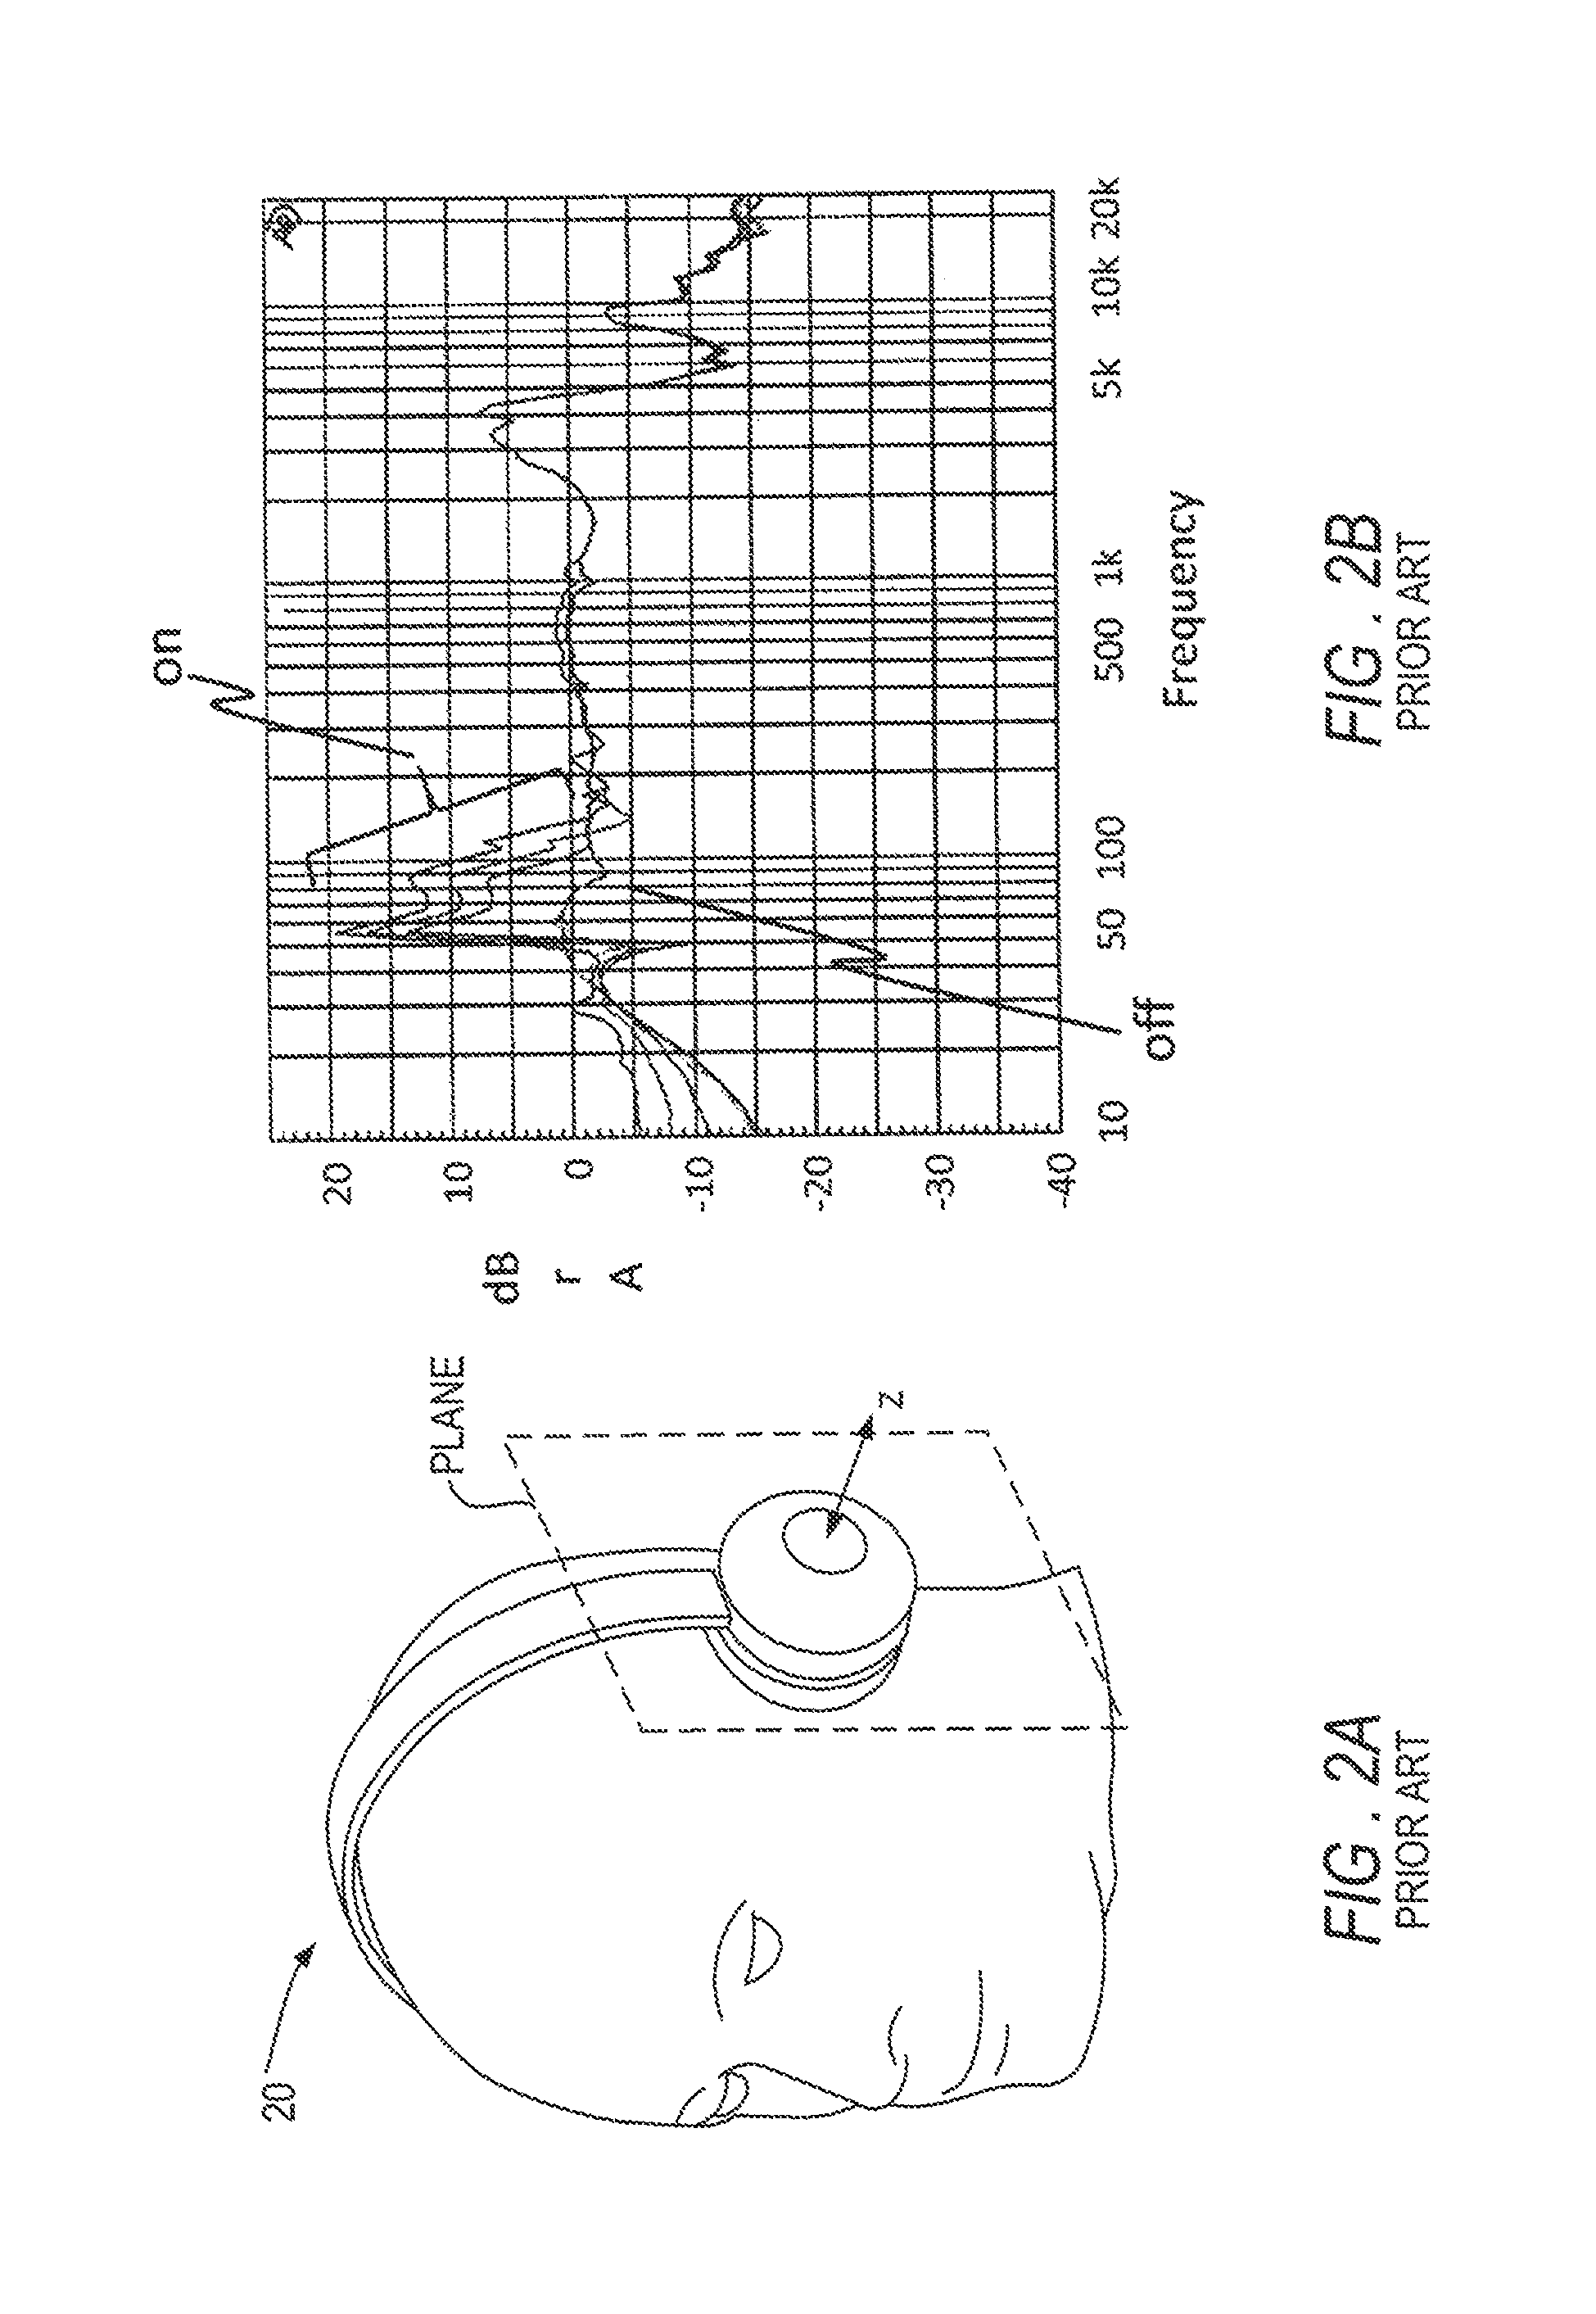 Systems and methods for generating damped electromagnetically actuated planar motion for audio-frequency vibrations